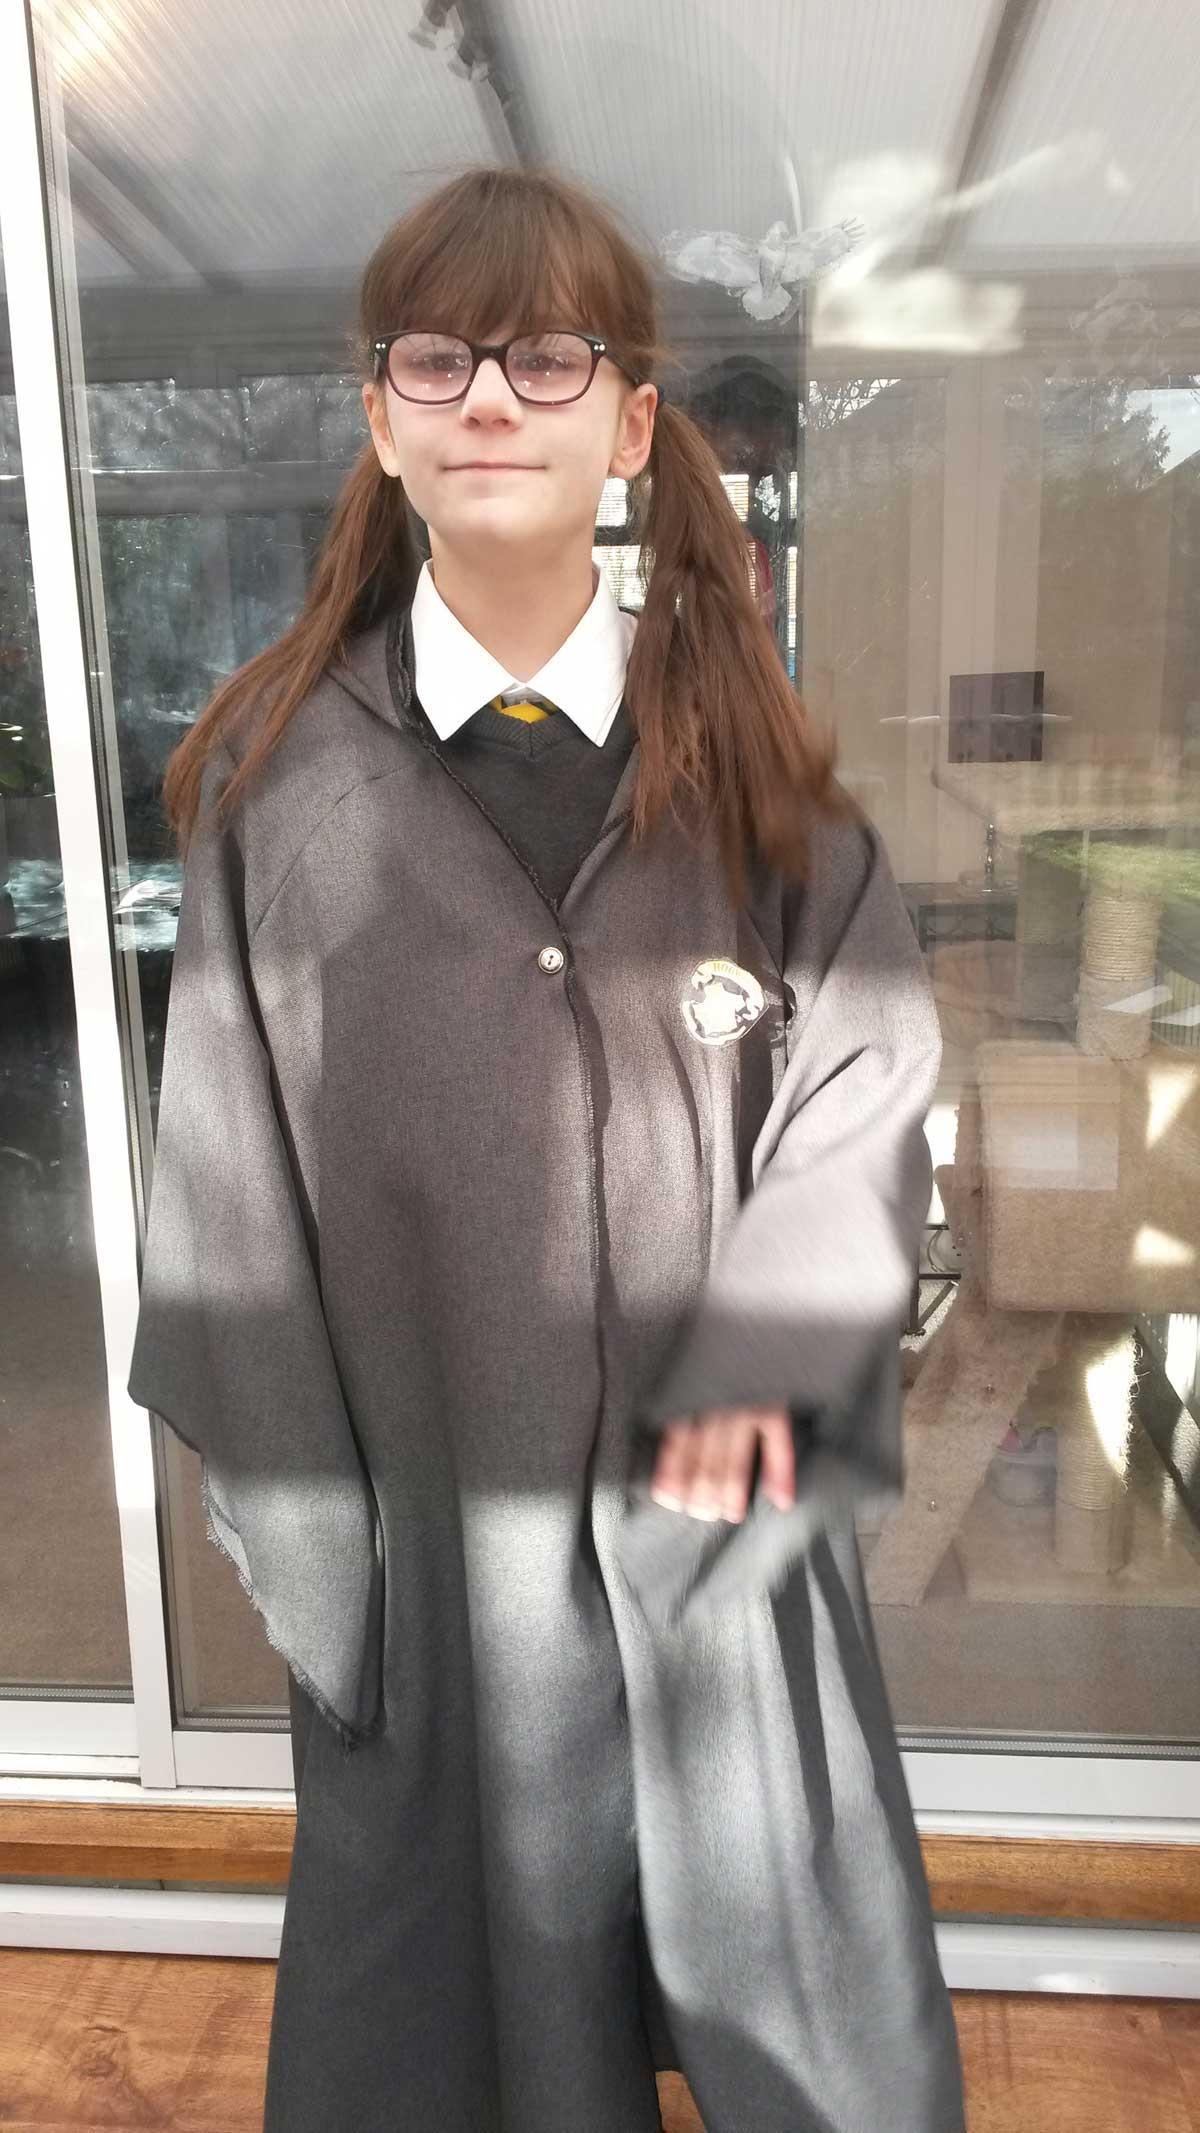 Bethany as Moaning Myrtle from Harry Potter